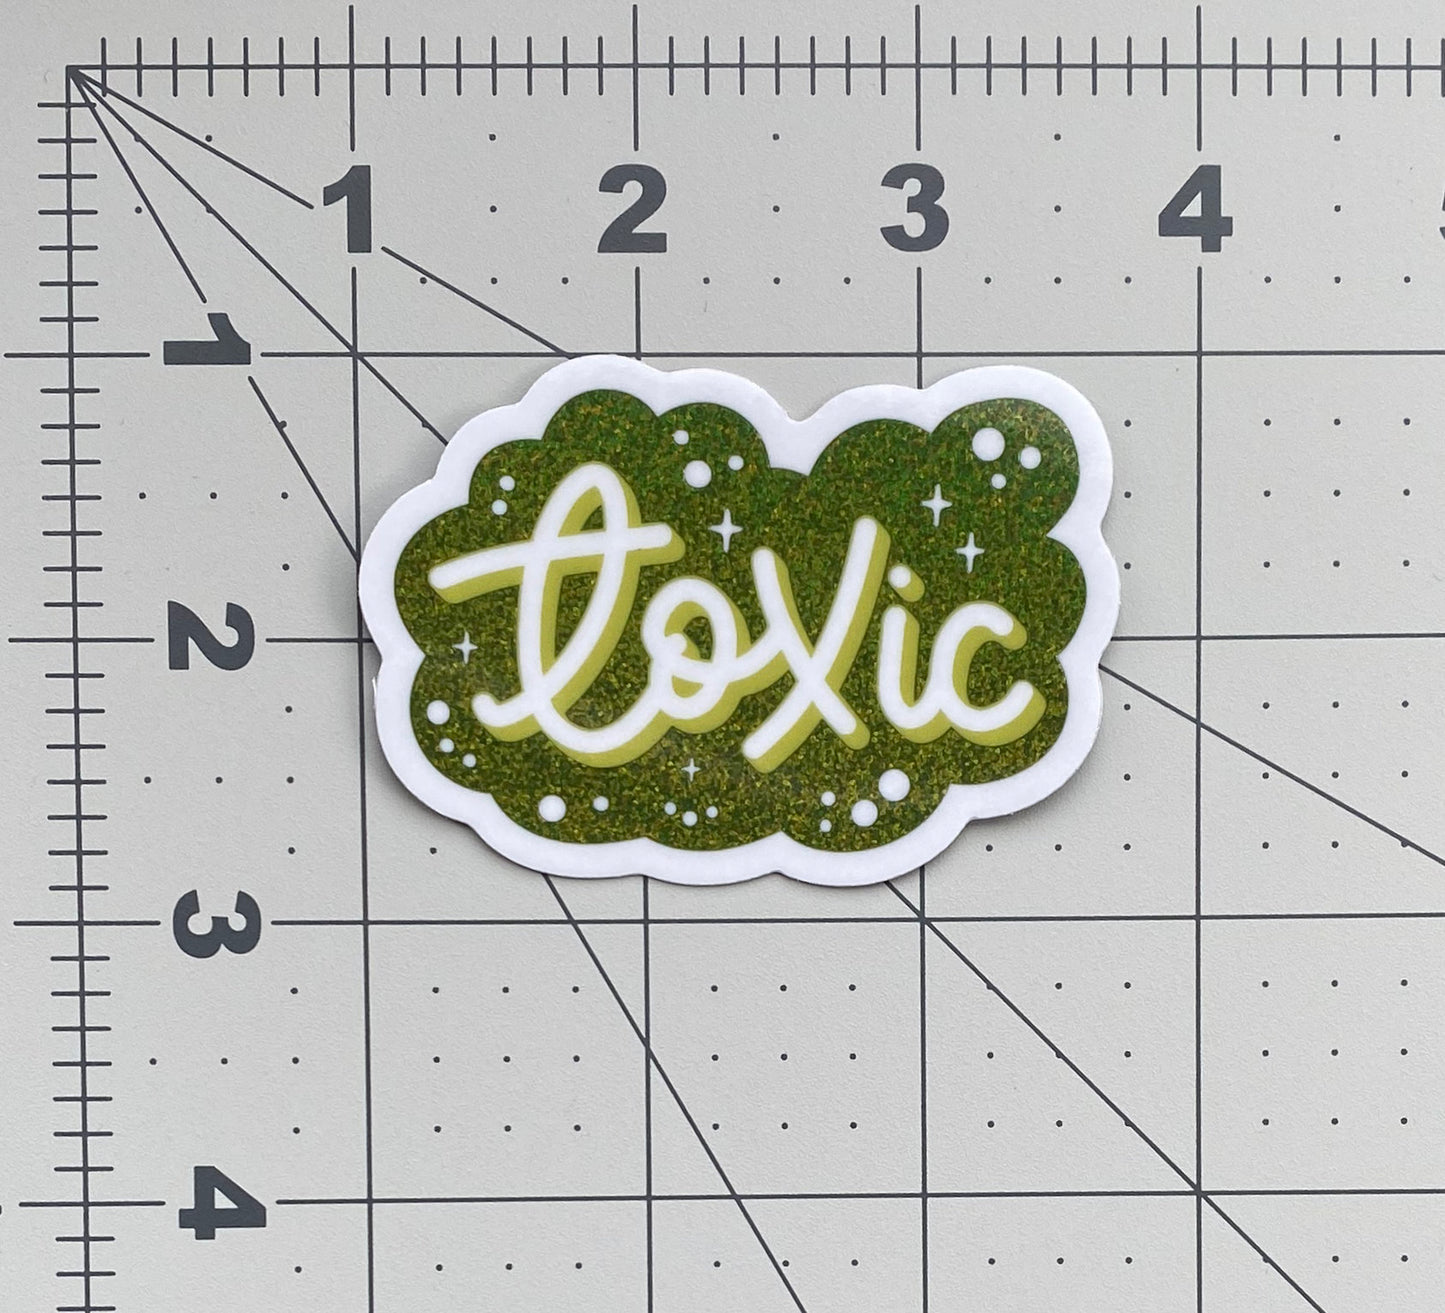 A pile of green glitter stickers that say "Toxic" in script. The sticker sits on a ruled background to show size.